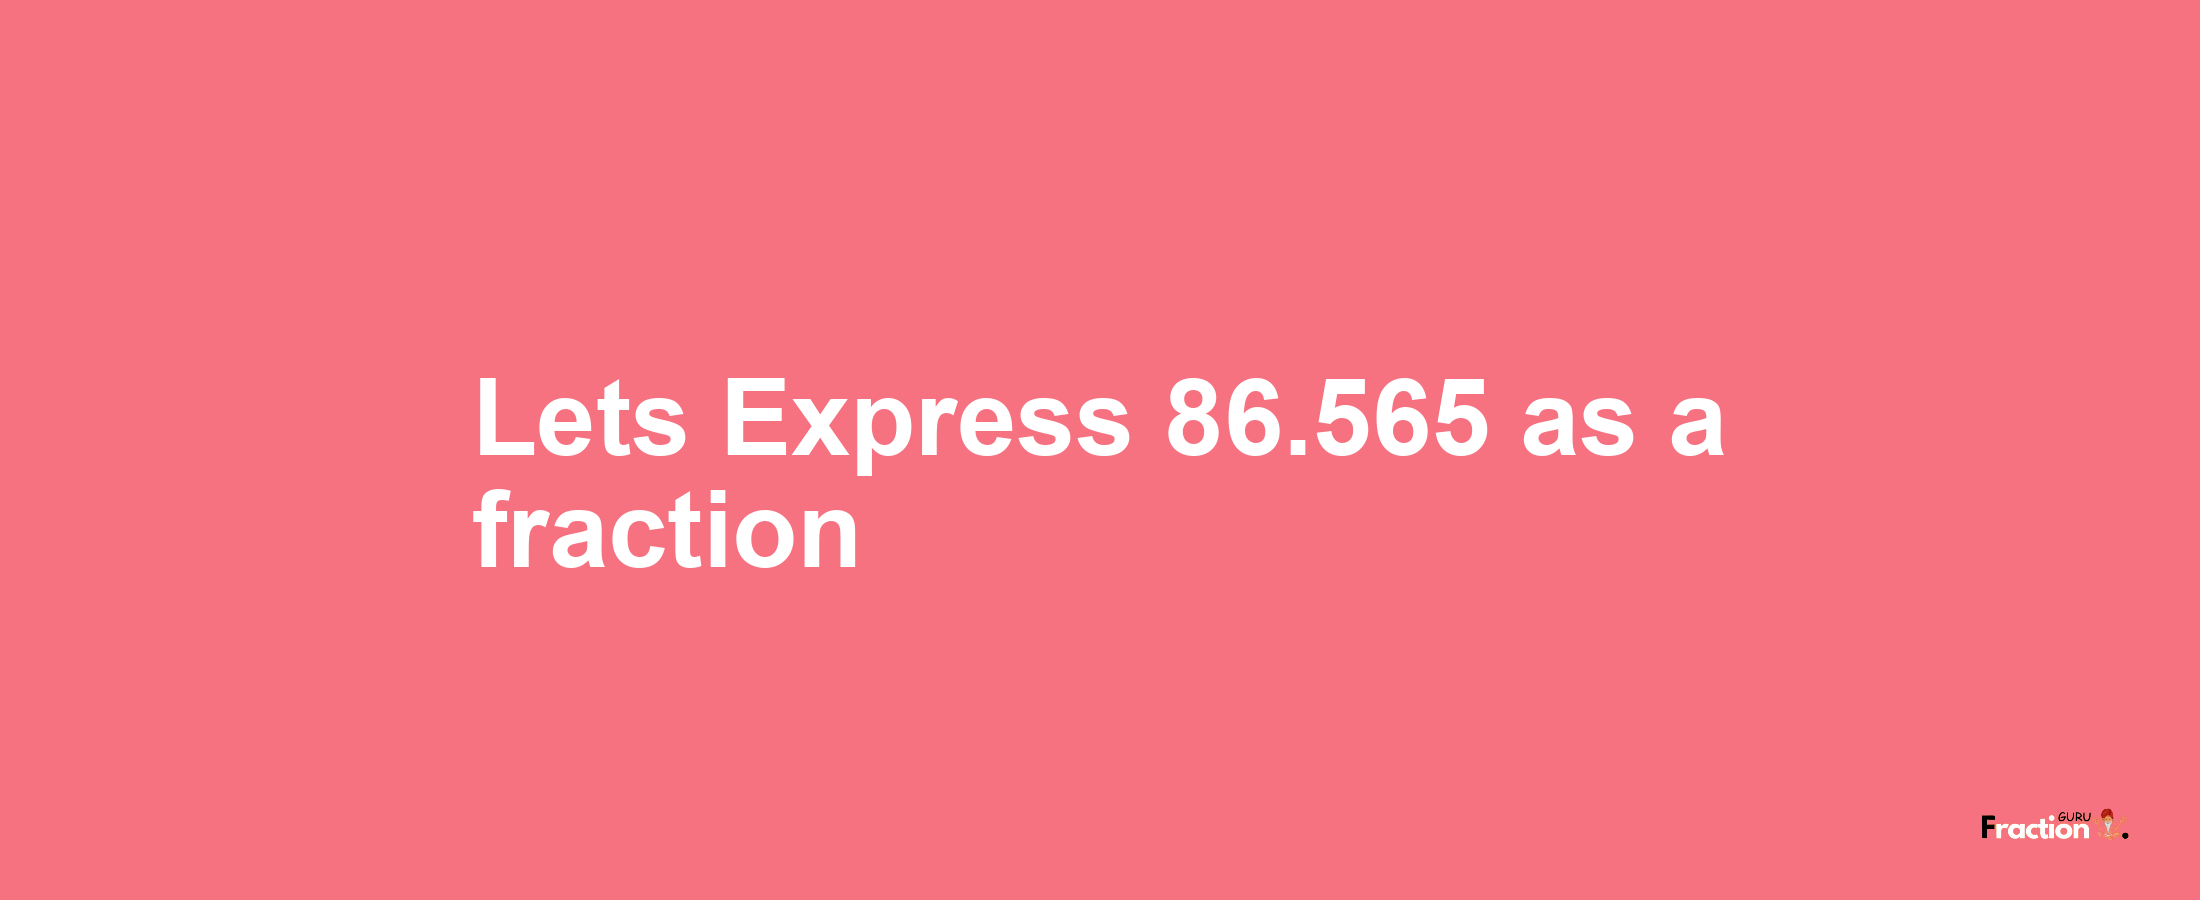 Lets Express 86.565 as afraction